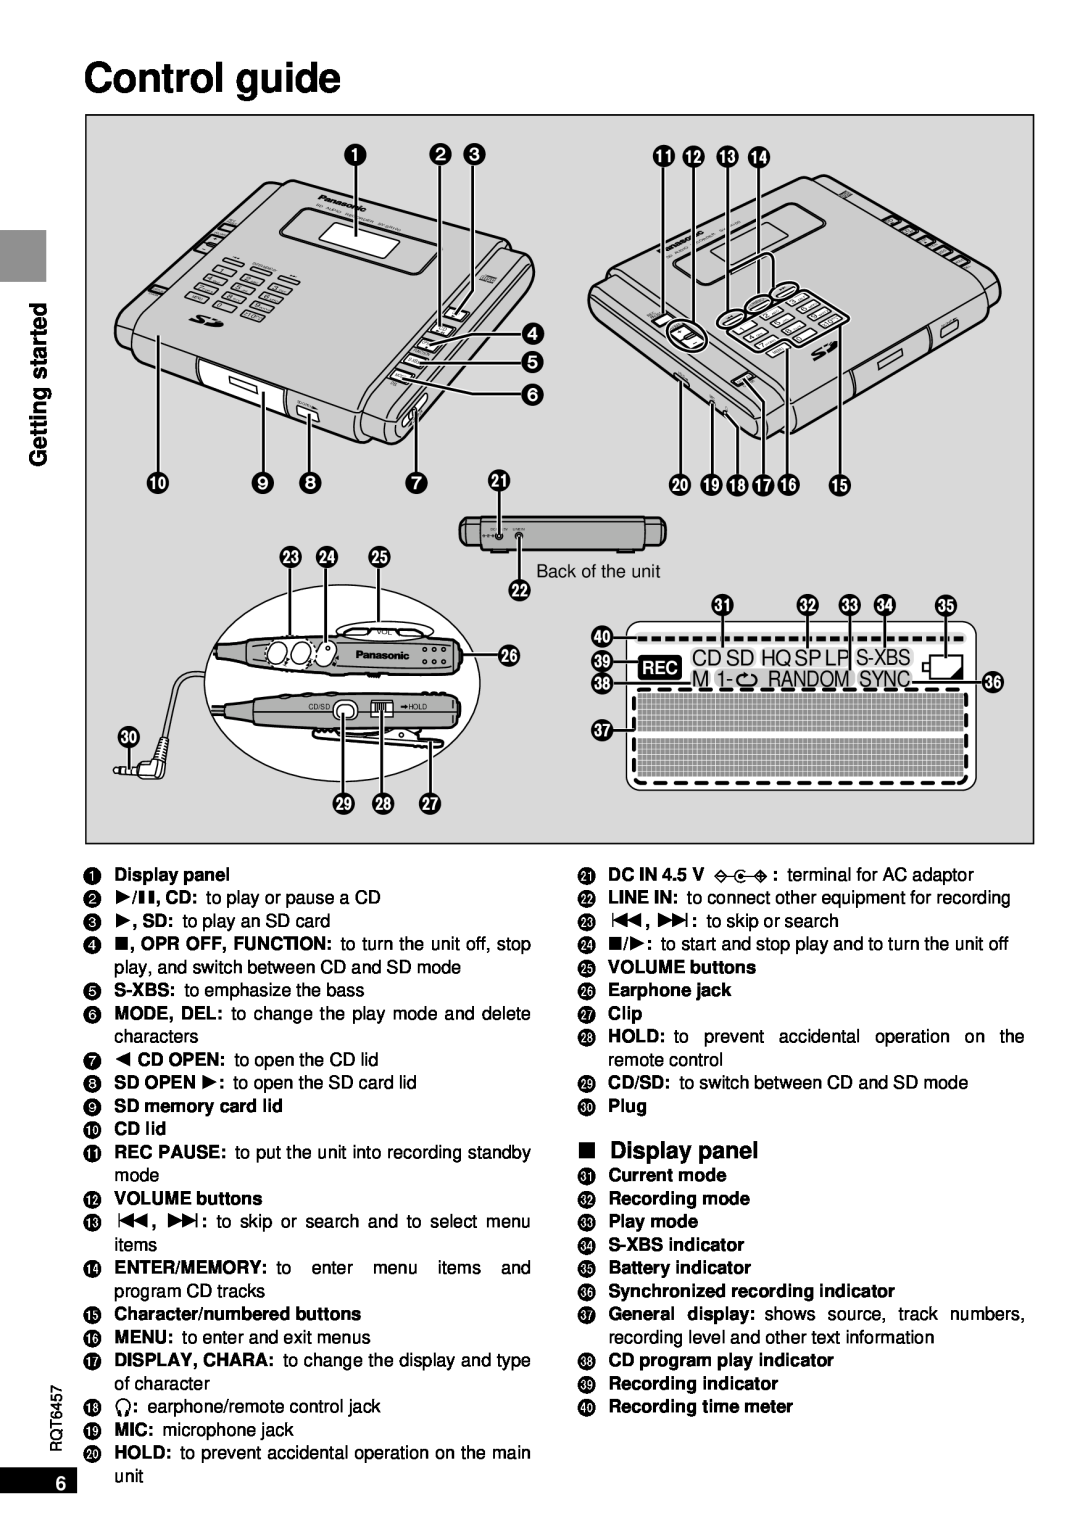 Panasonic SV-SR100 operating instructions Control guide, started, Getting, D Cba@, P Q R, M L K, ∫ Display panel 